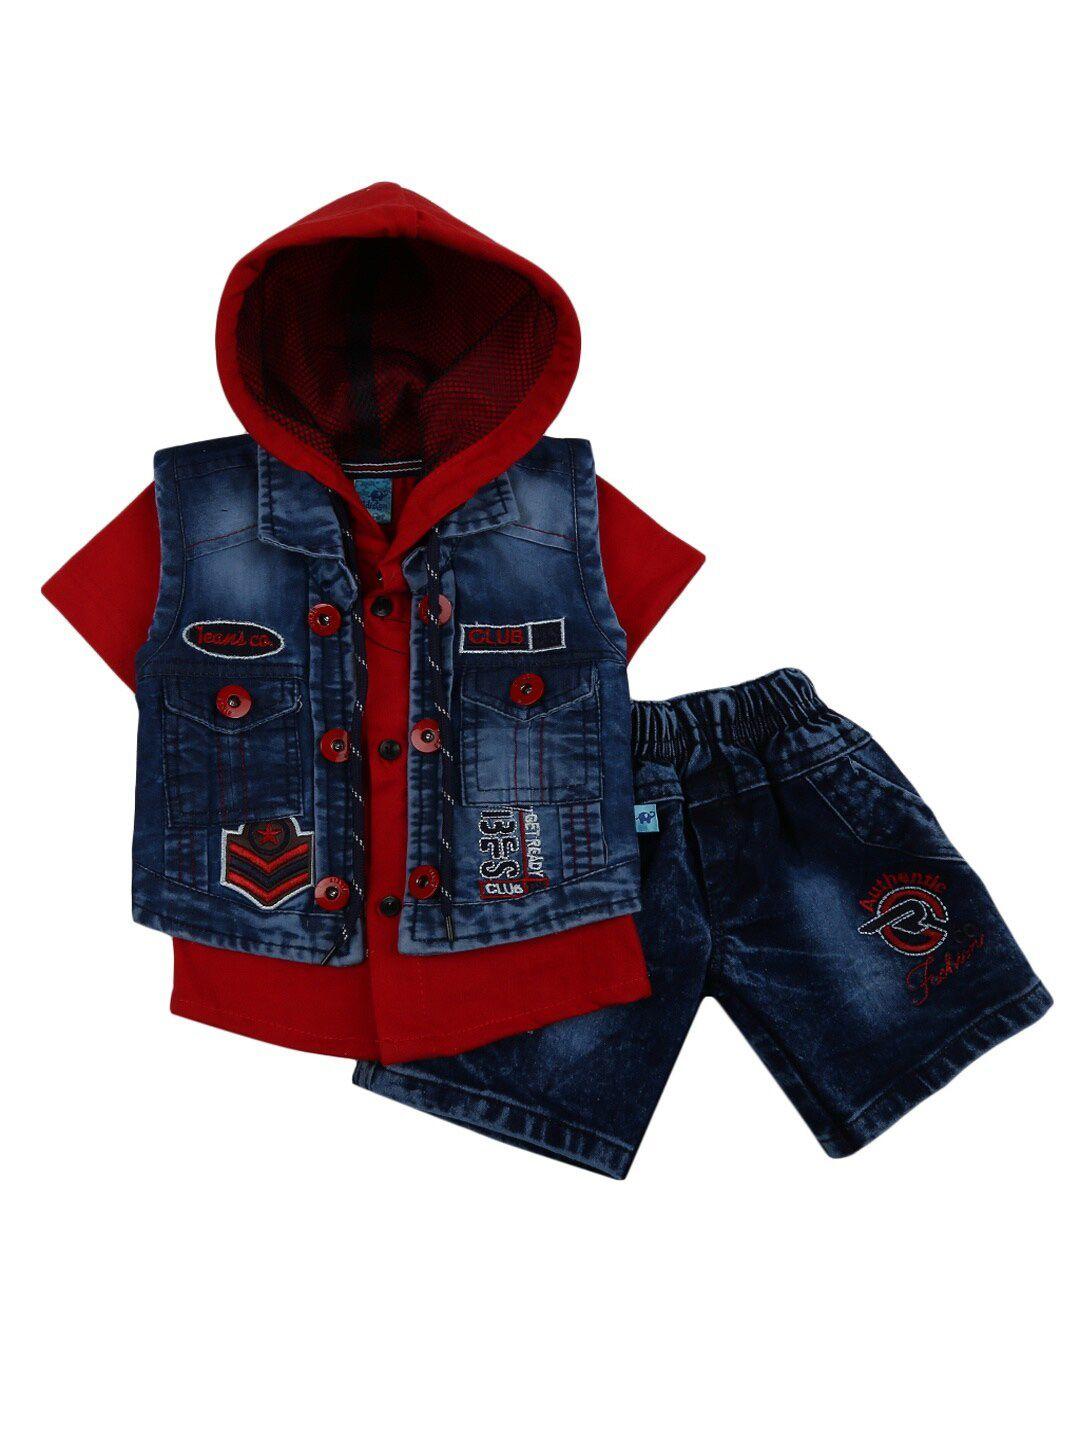 v-mart-unisex-kids-red-&-navy-blue-printed-shirt-with-shorts